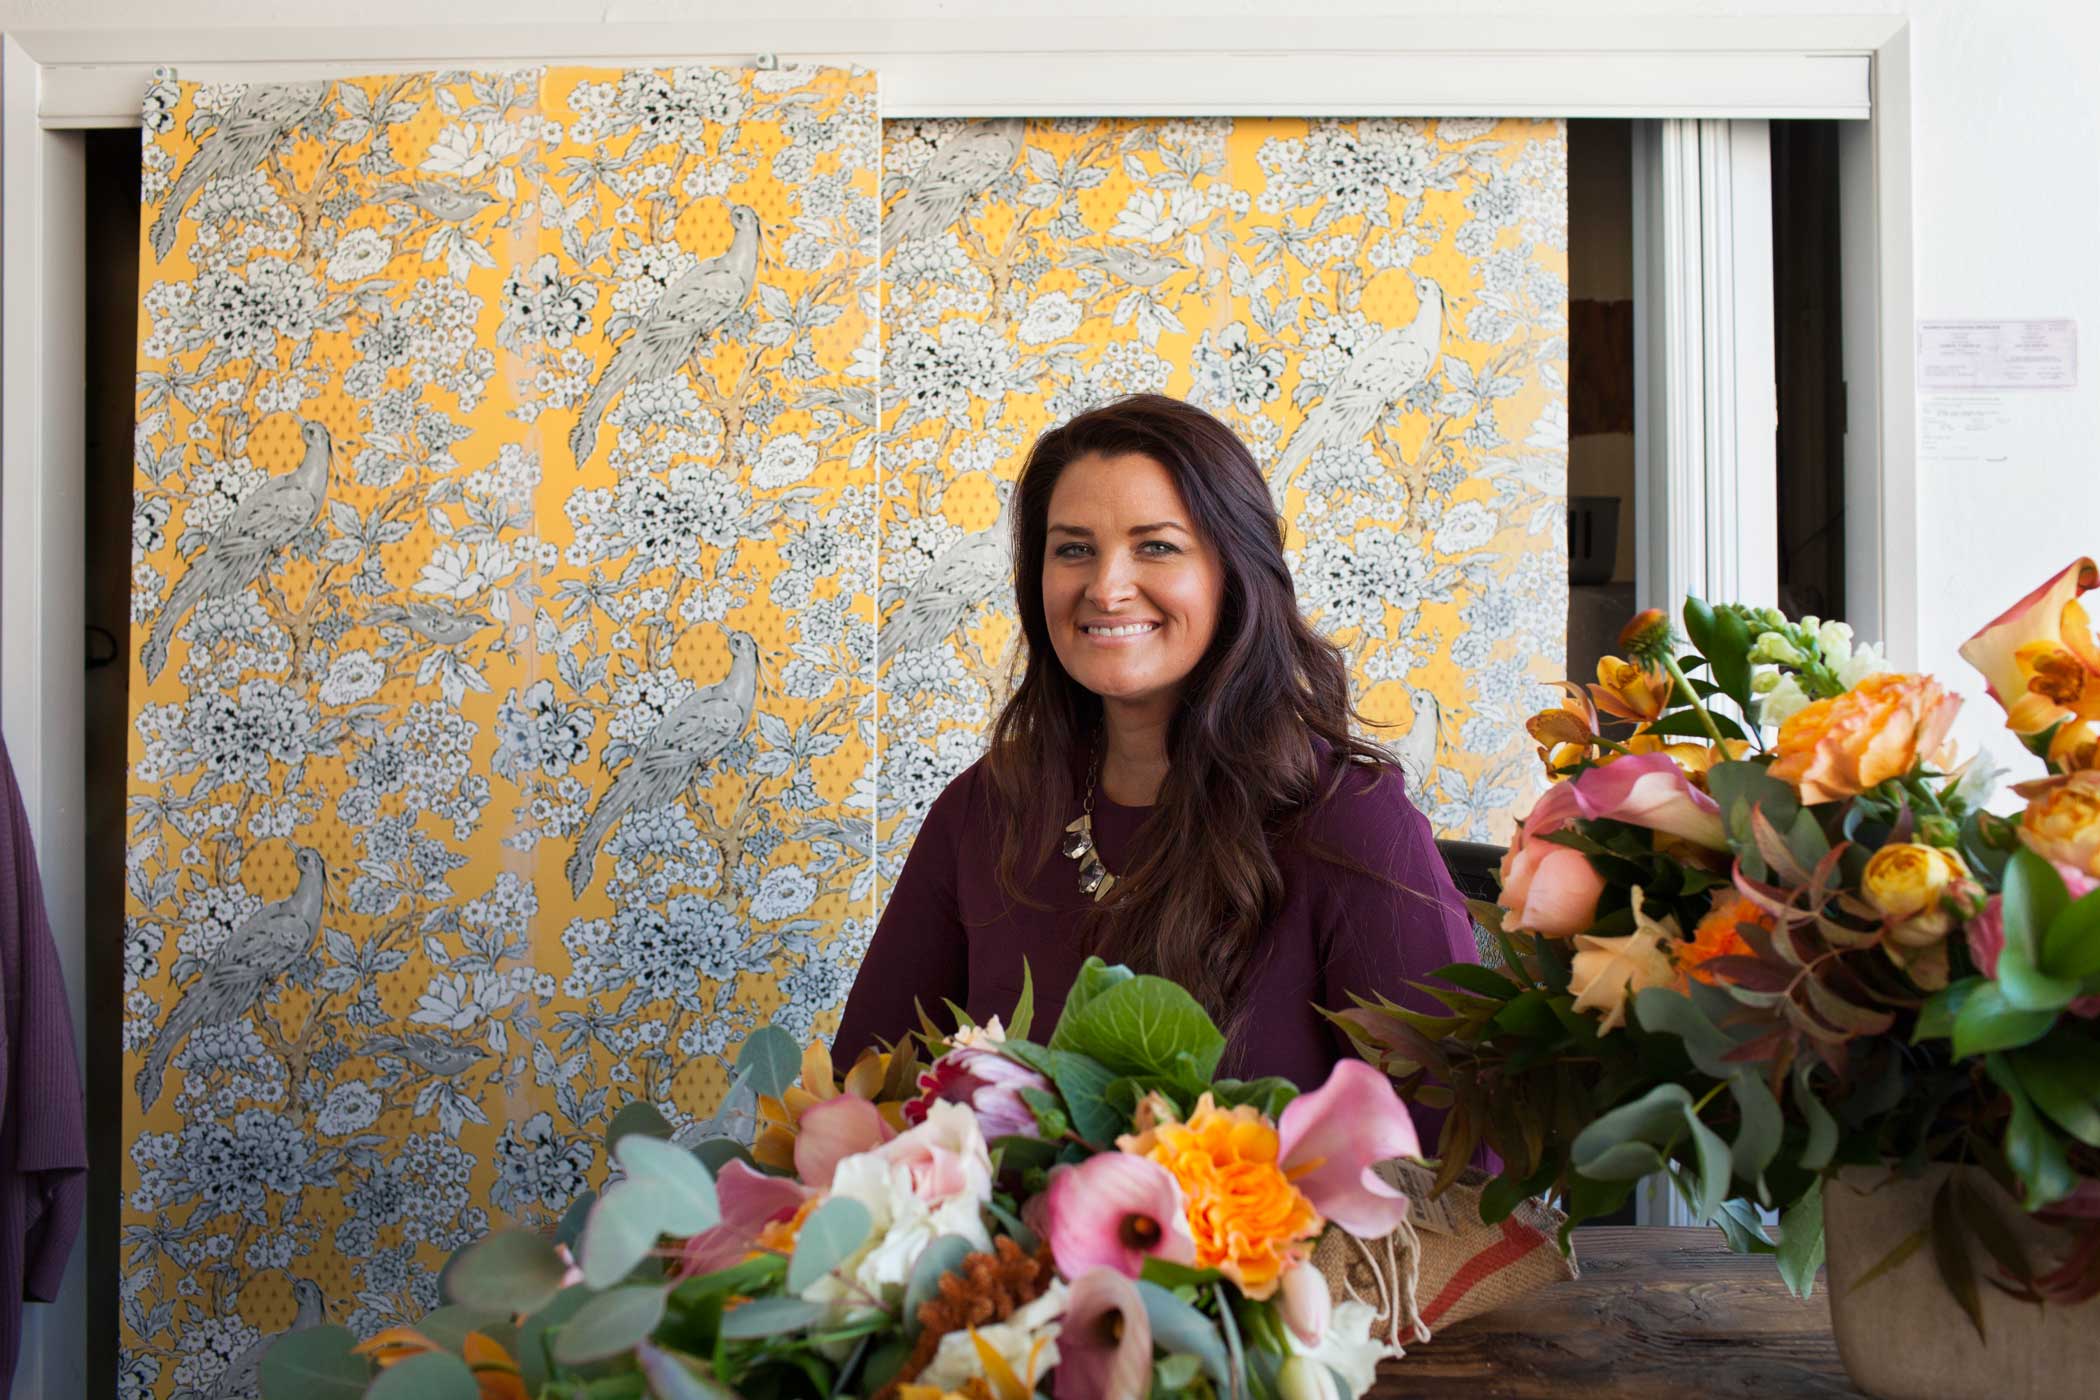 Christina Stembel, Owner & CEO of Farmgirl Flowers, in her office above the SF Flower Mart where her business is located.